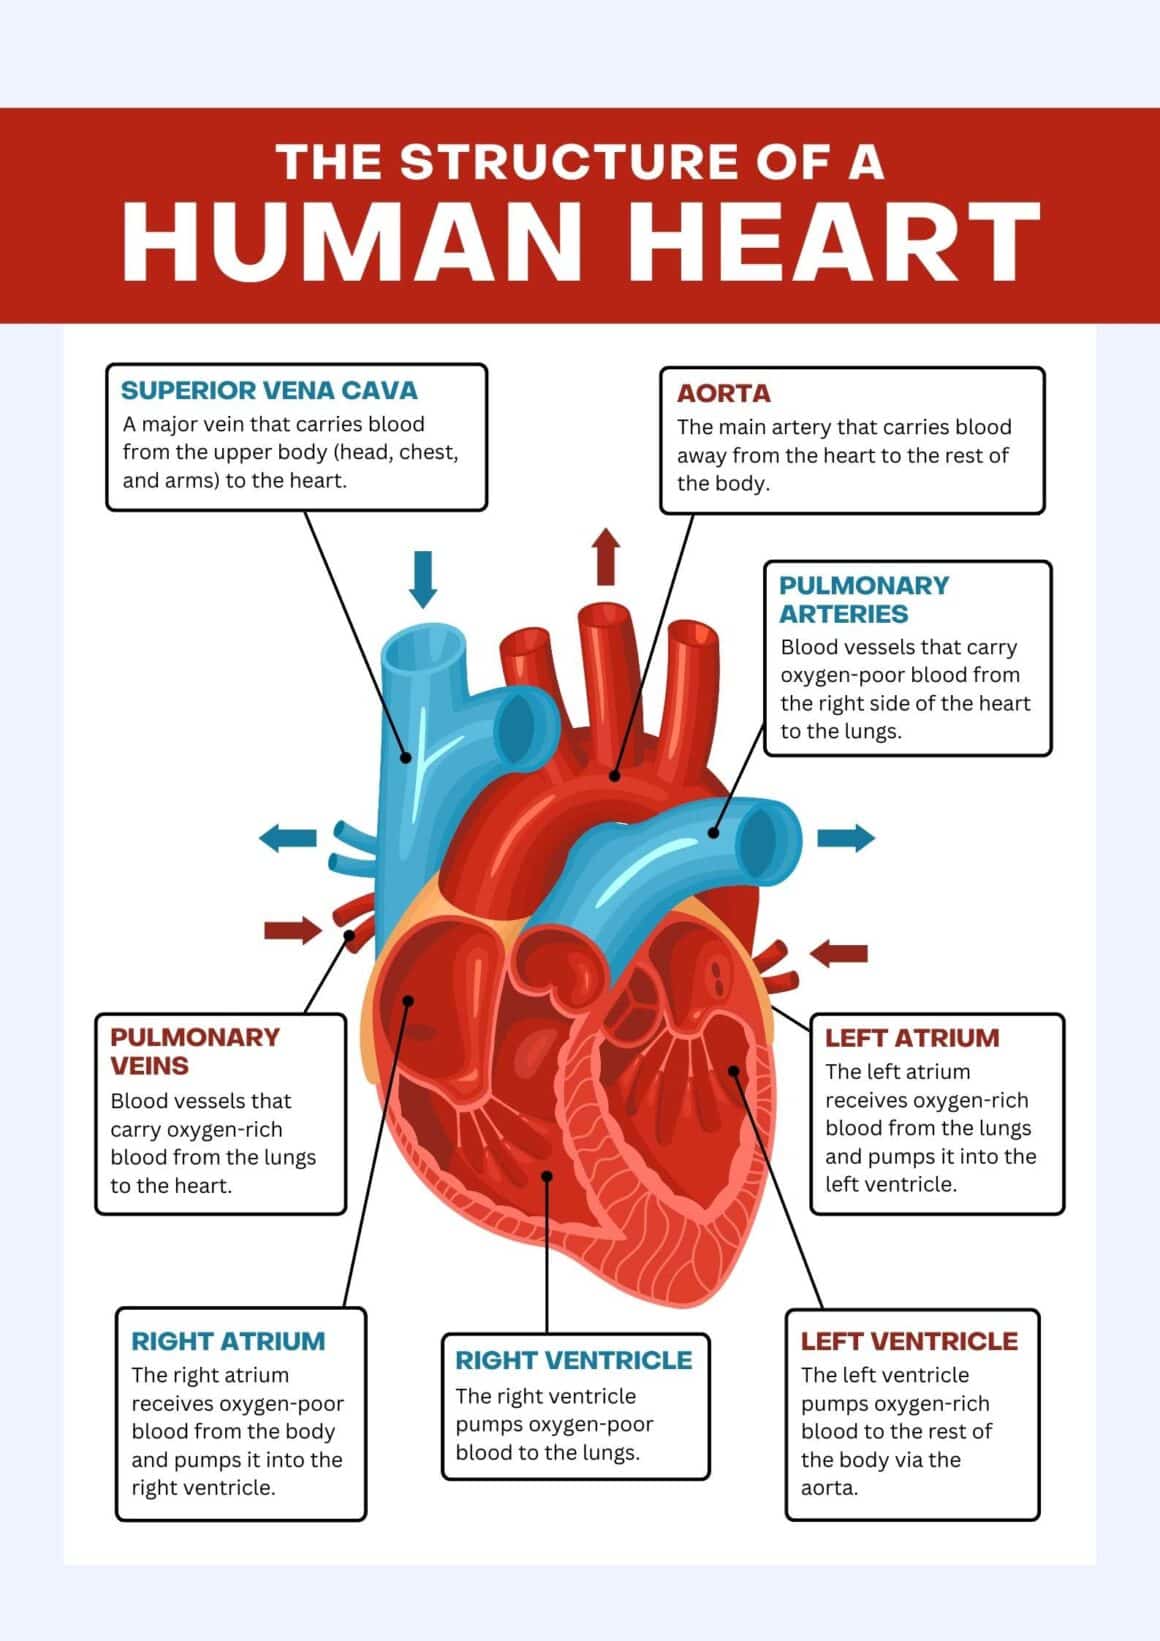 The Structure of a Human Heart
